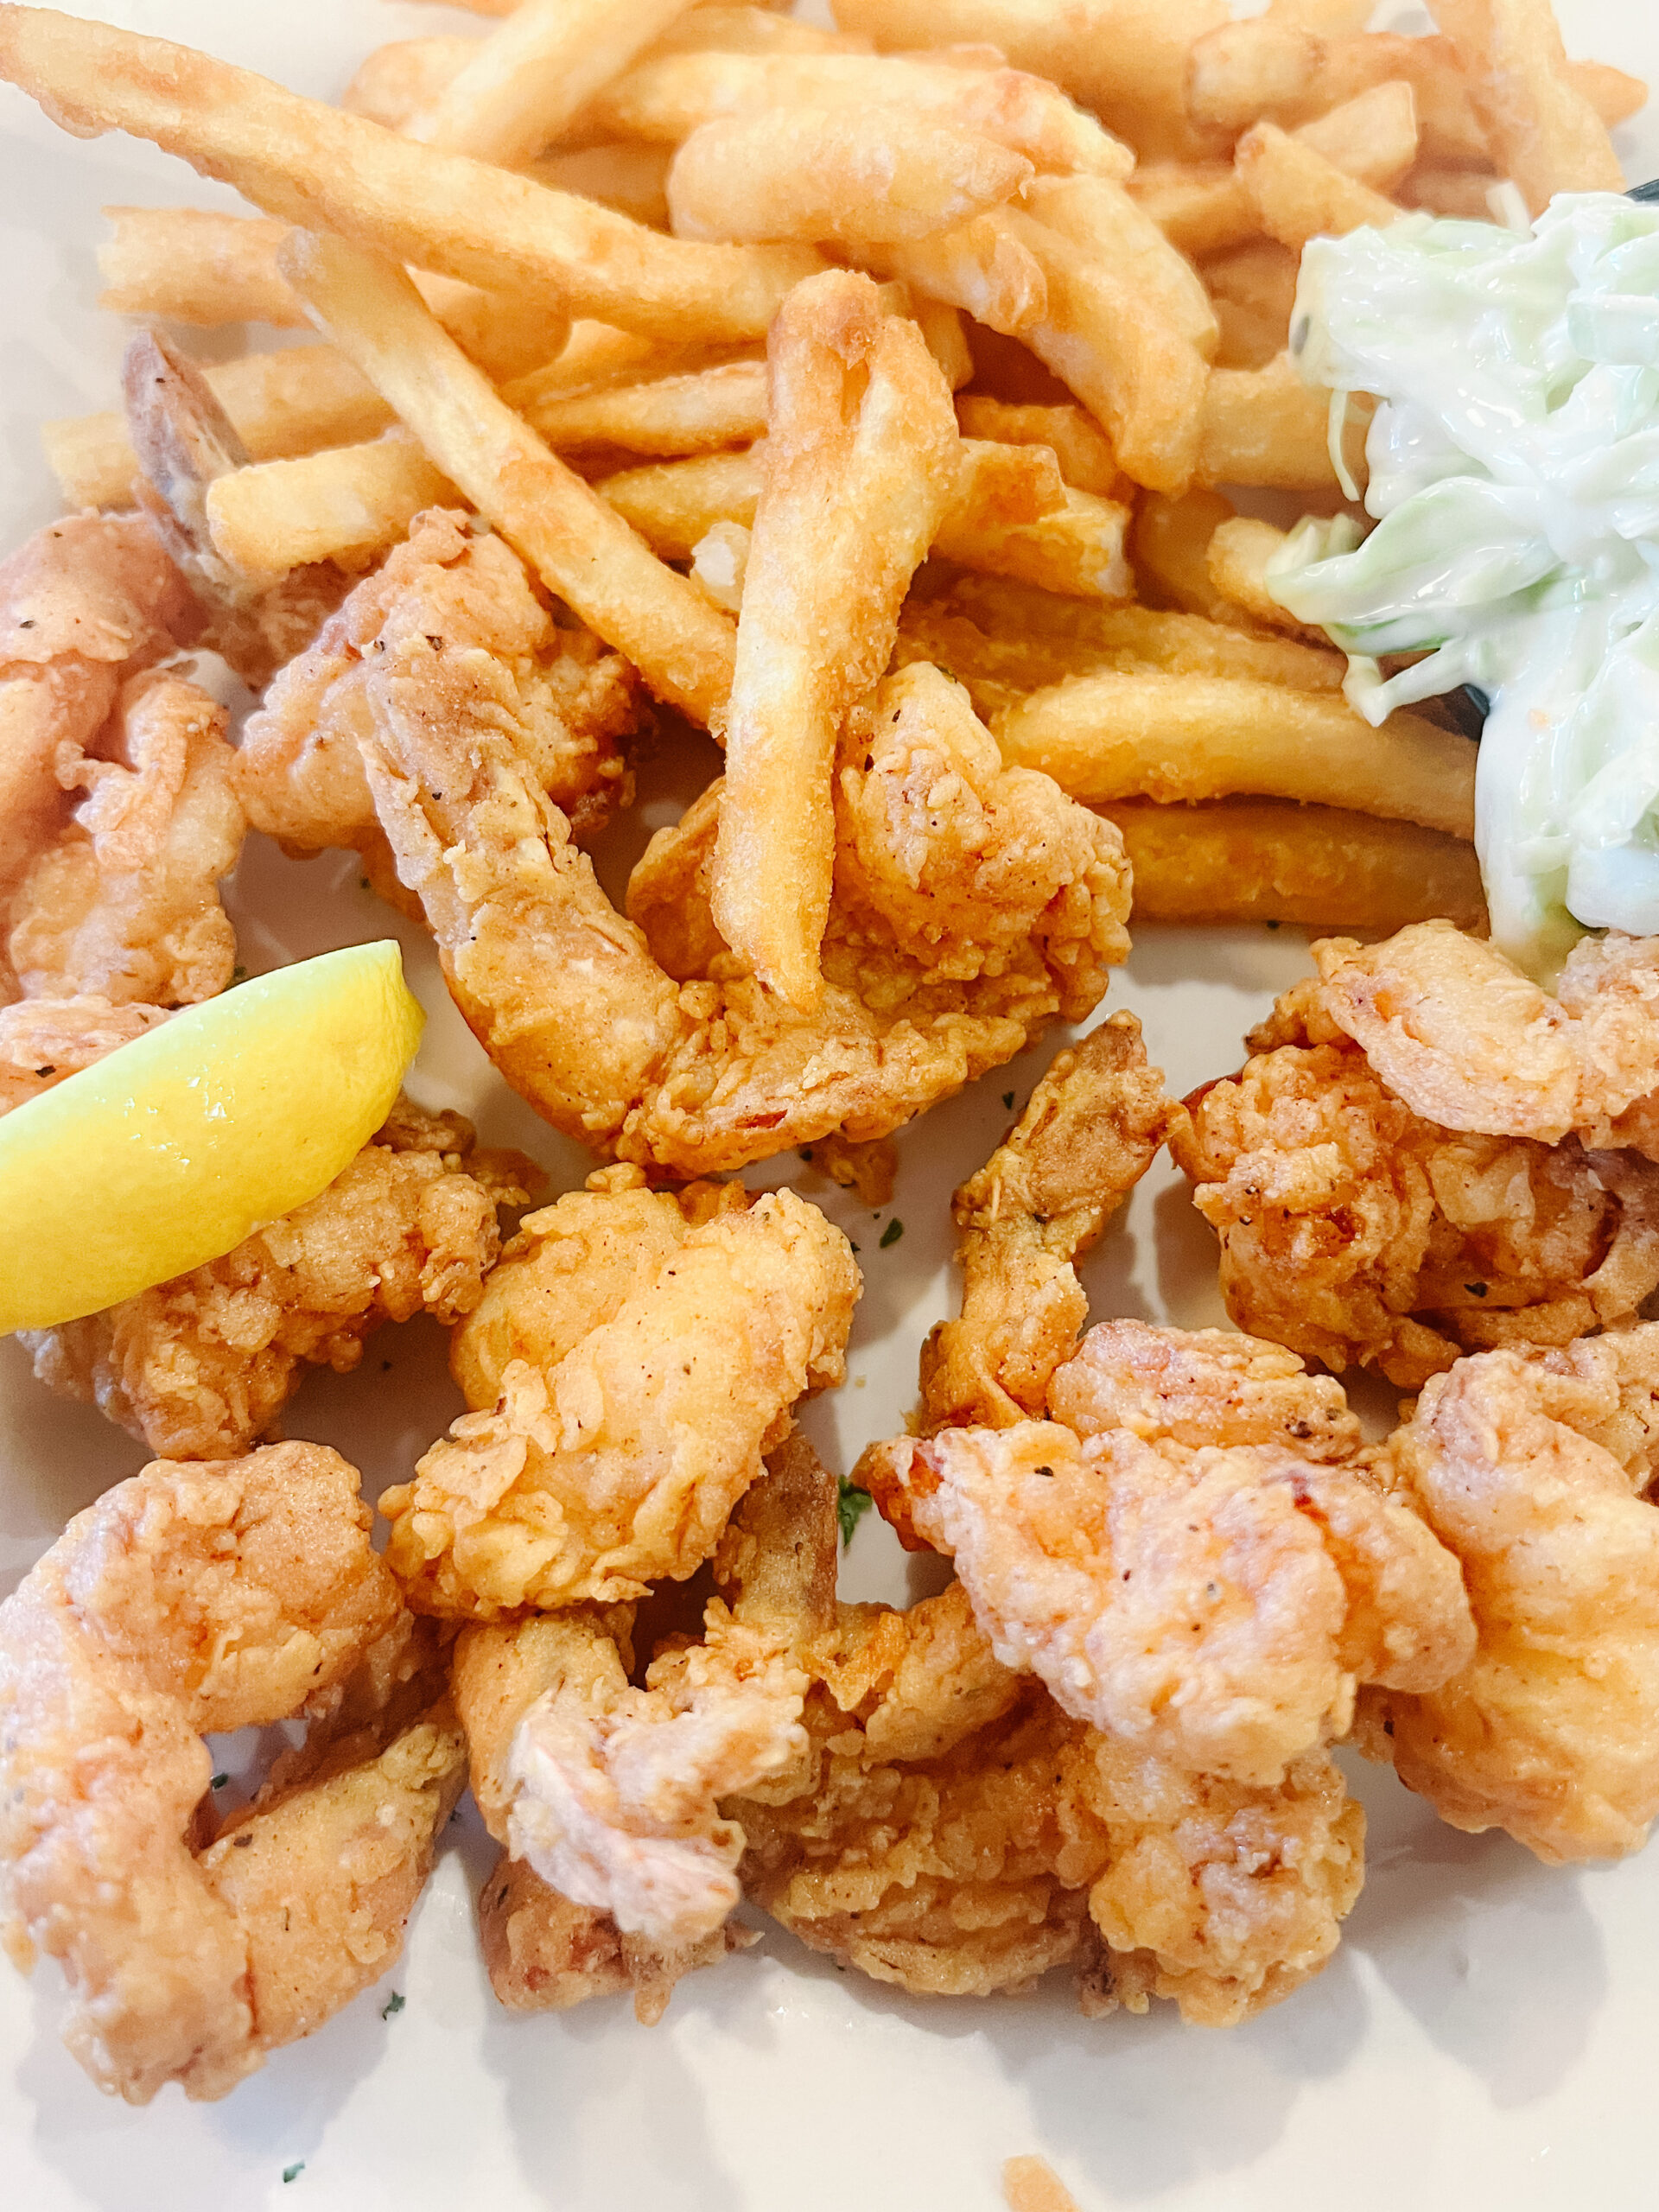 Fried Shrimp, cole slaw, and french fries at the sunset grille in saint augustine